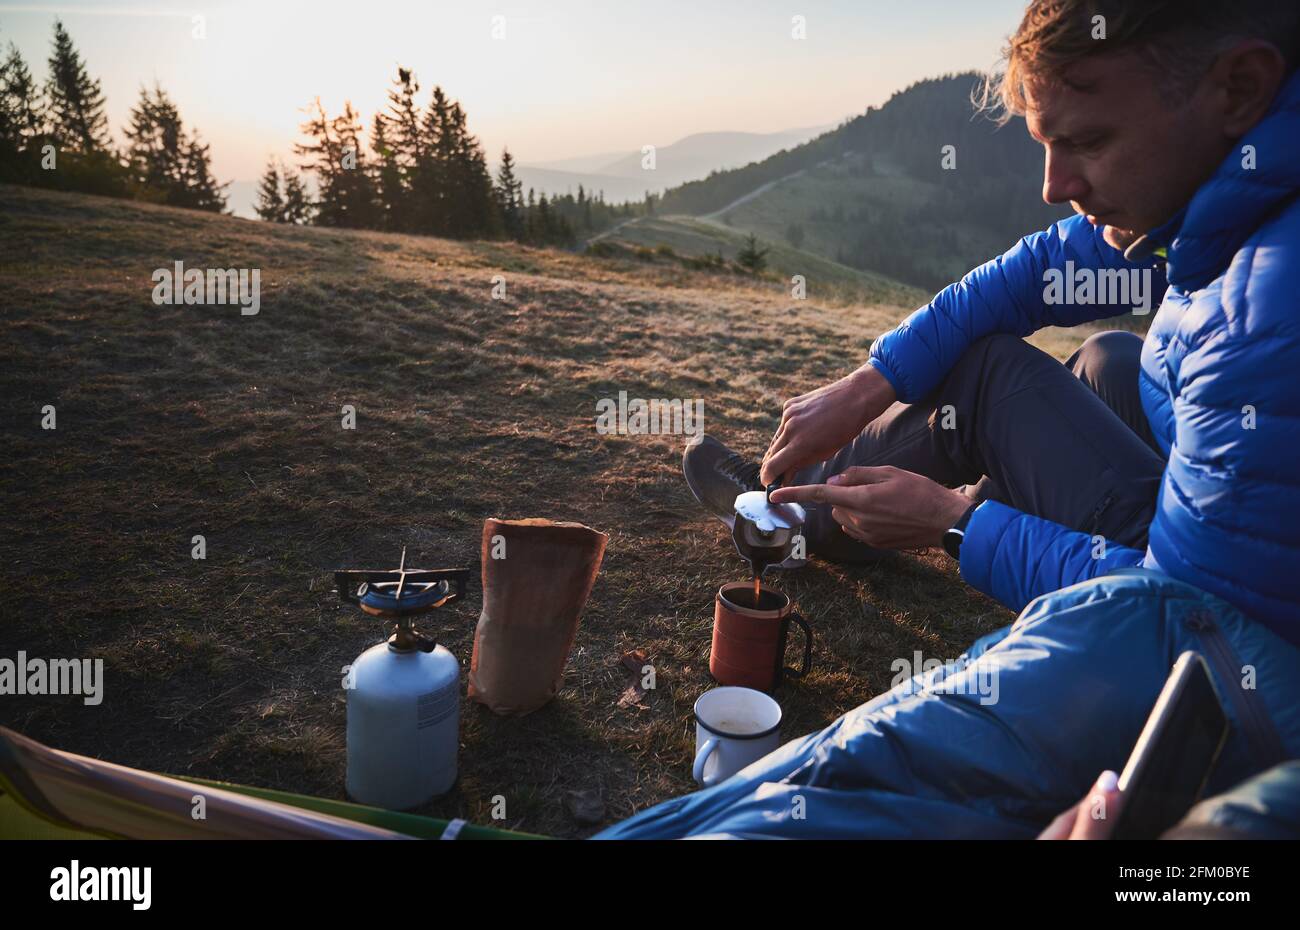 Handsome young man traveler sitting on grassy hill near camp tent and pouring hot drink into cup. Male hiker making coffee. Concept of hiking, camping and tourist equipment. Stock Photo